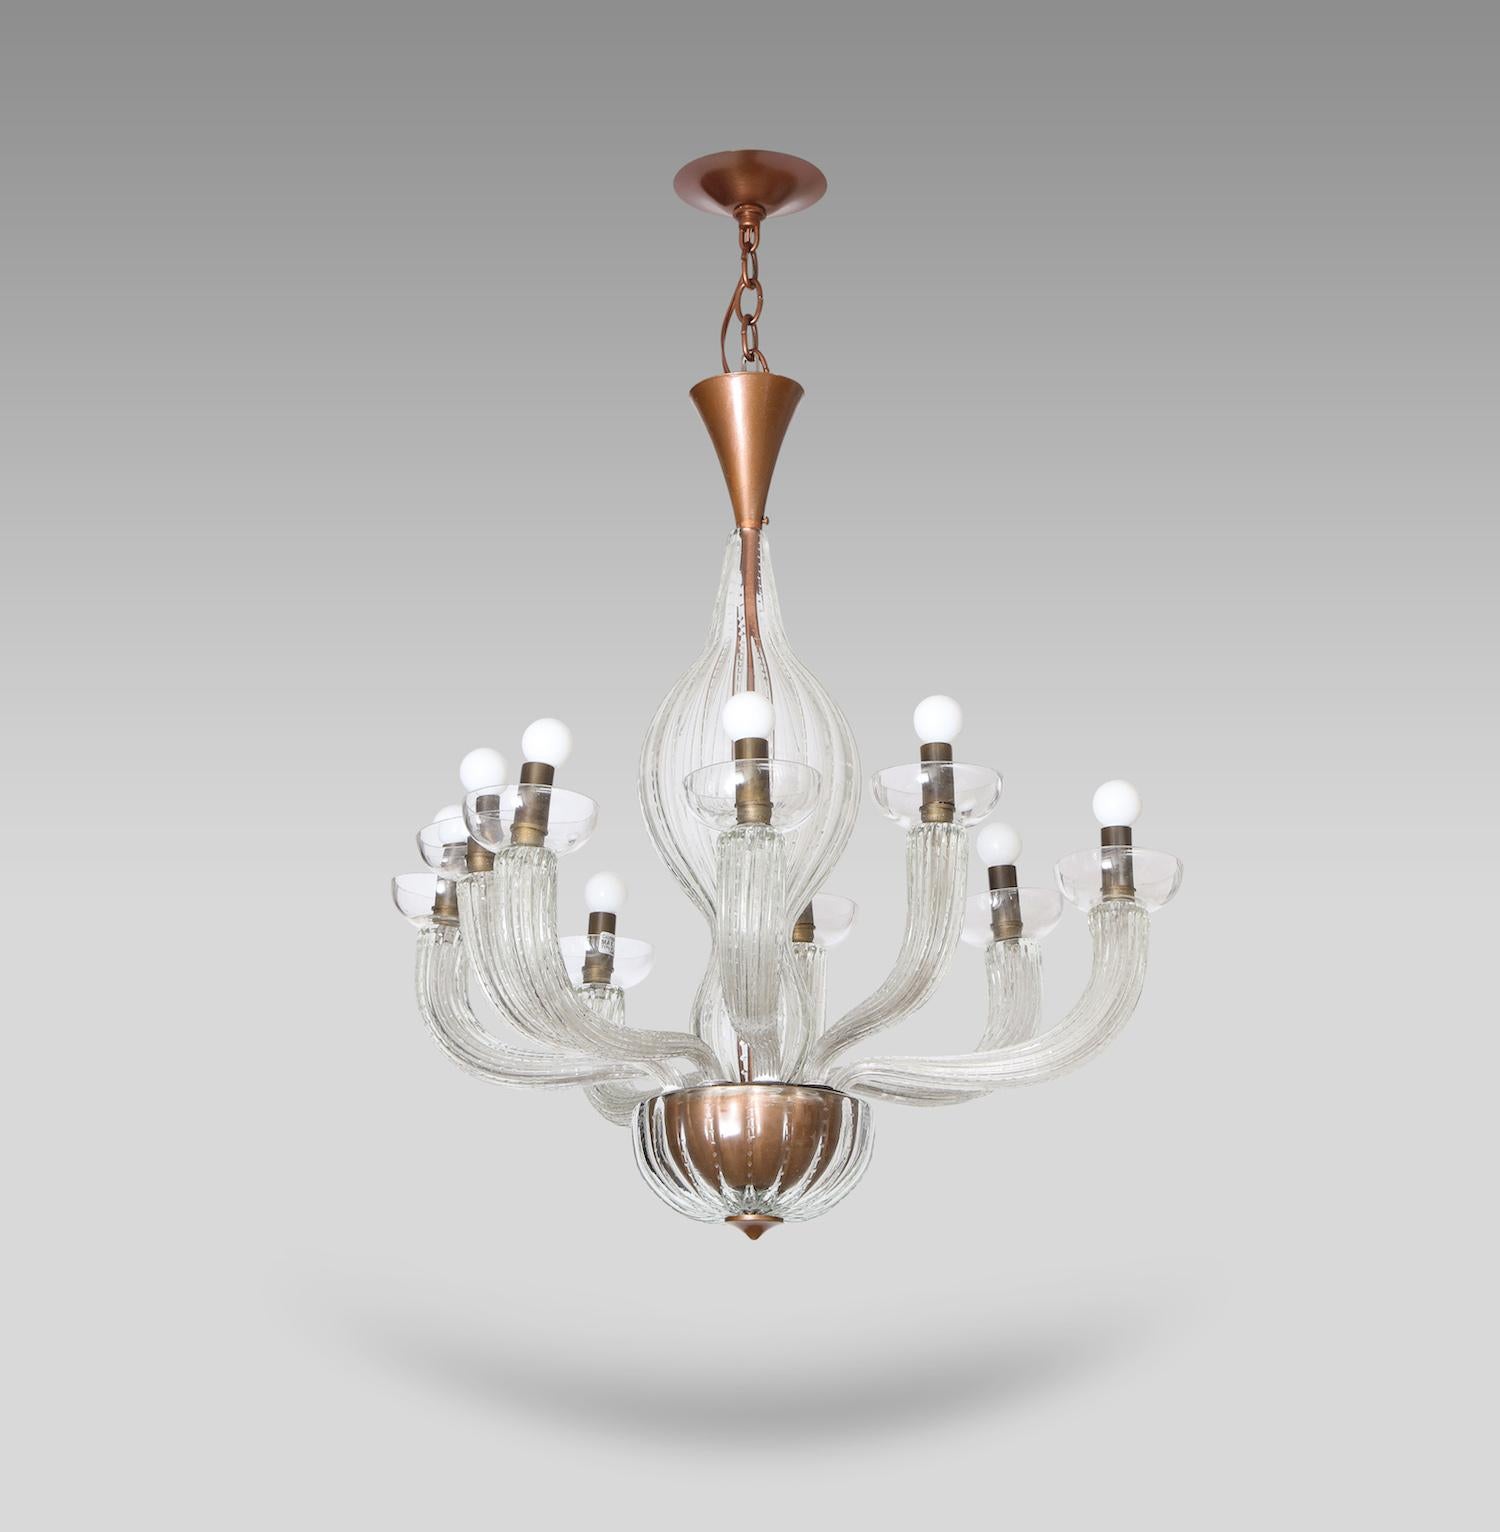 Rare 9-arm chandelier by Carlo Scarpa for Venini. Clear-colored textured glass fixture with brass mounts and gilded metal. Nine arms, each supporting a simple glass bobeche and fitted with a standard candelabra socket. This fixture has been UL